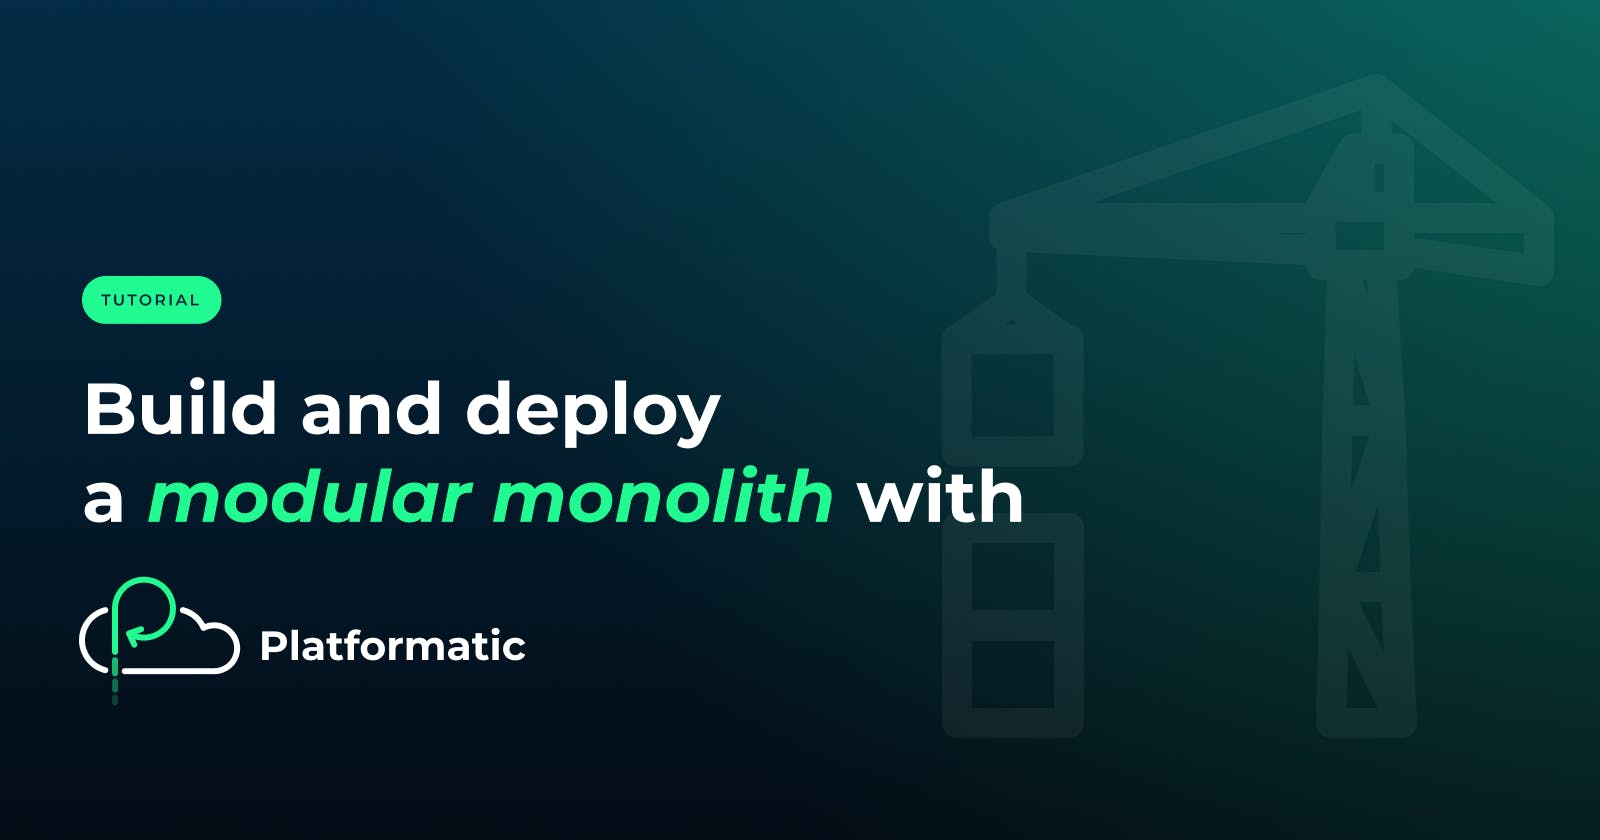 Build and deploy a modular monolith with Platformatic